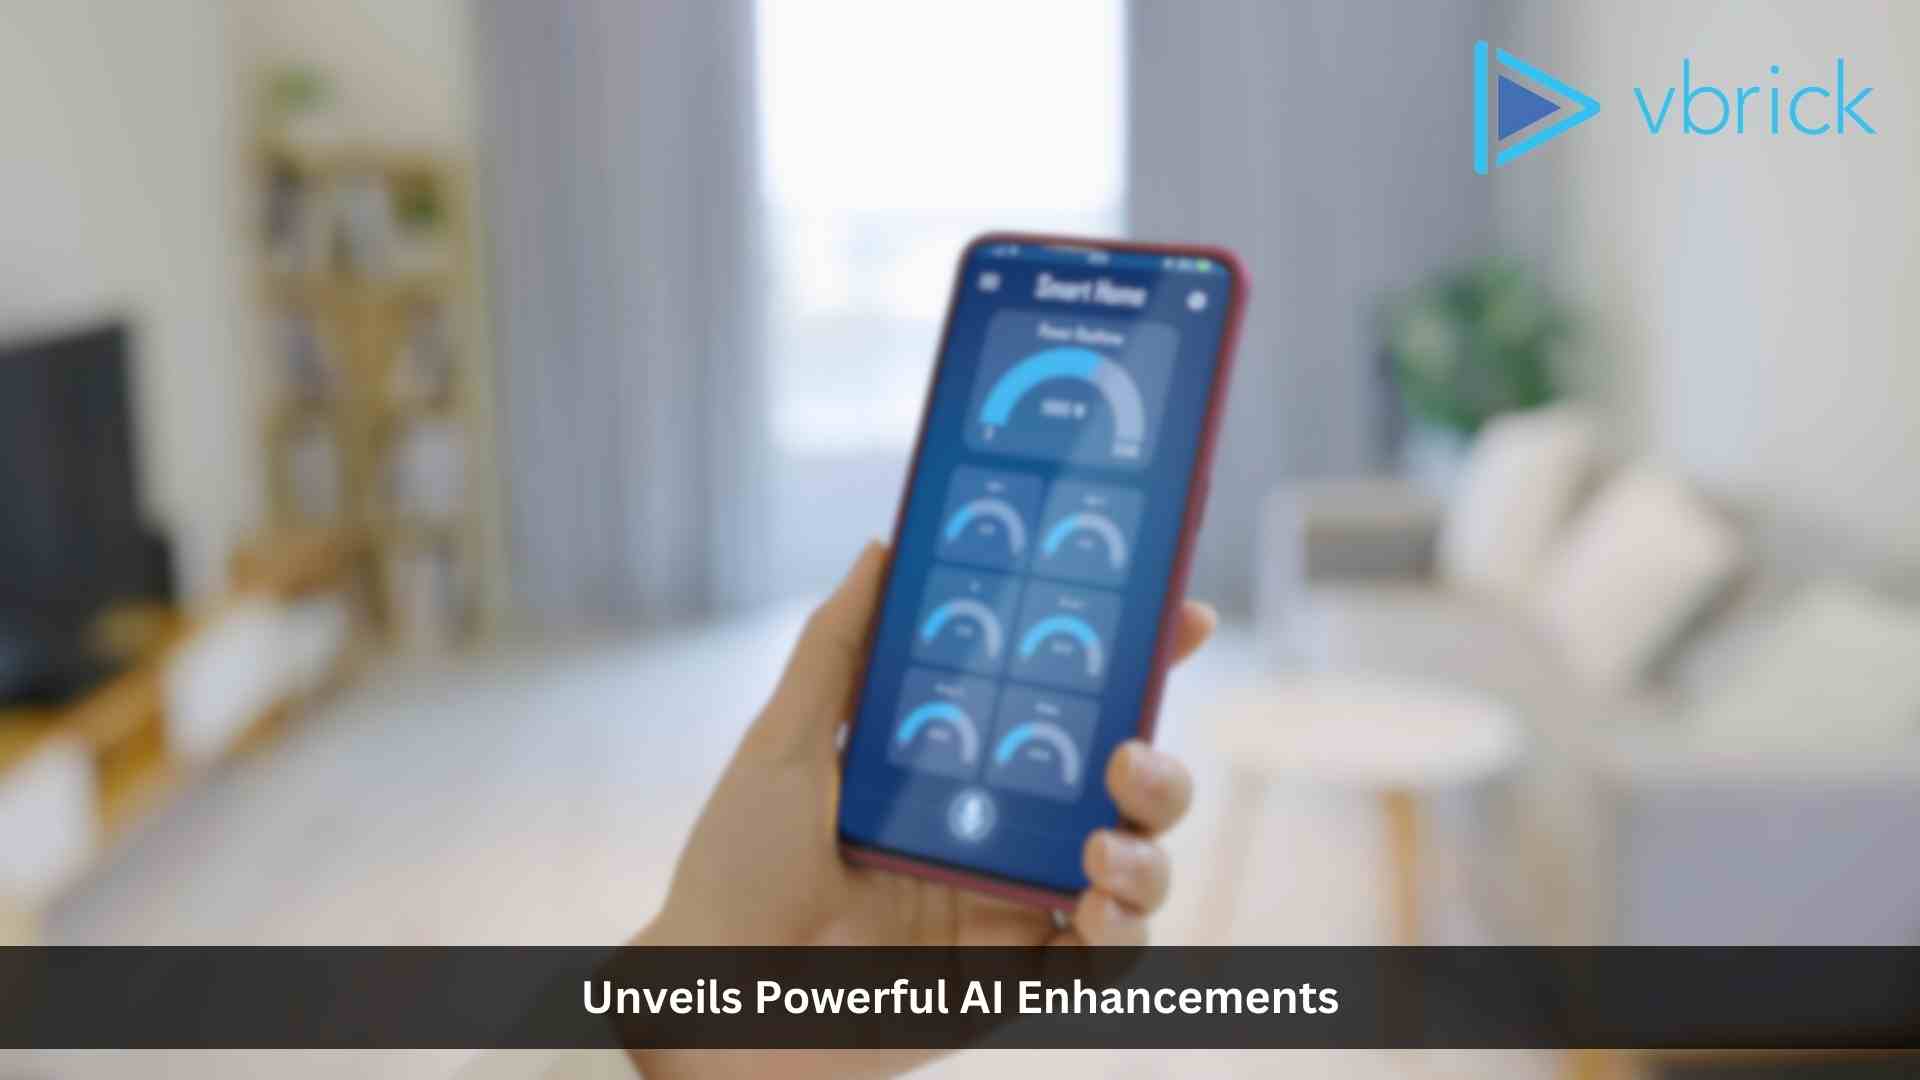 Vbrick Unveils Powerful AI Enhancements, Driving the Future of Video in the Enterprise